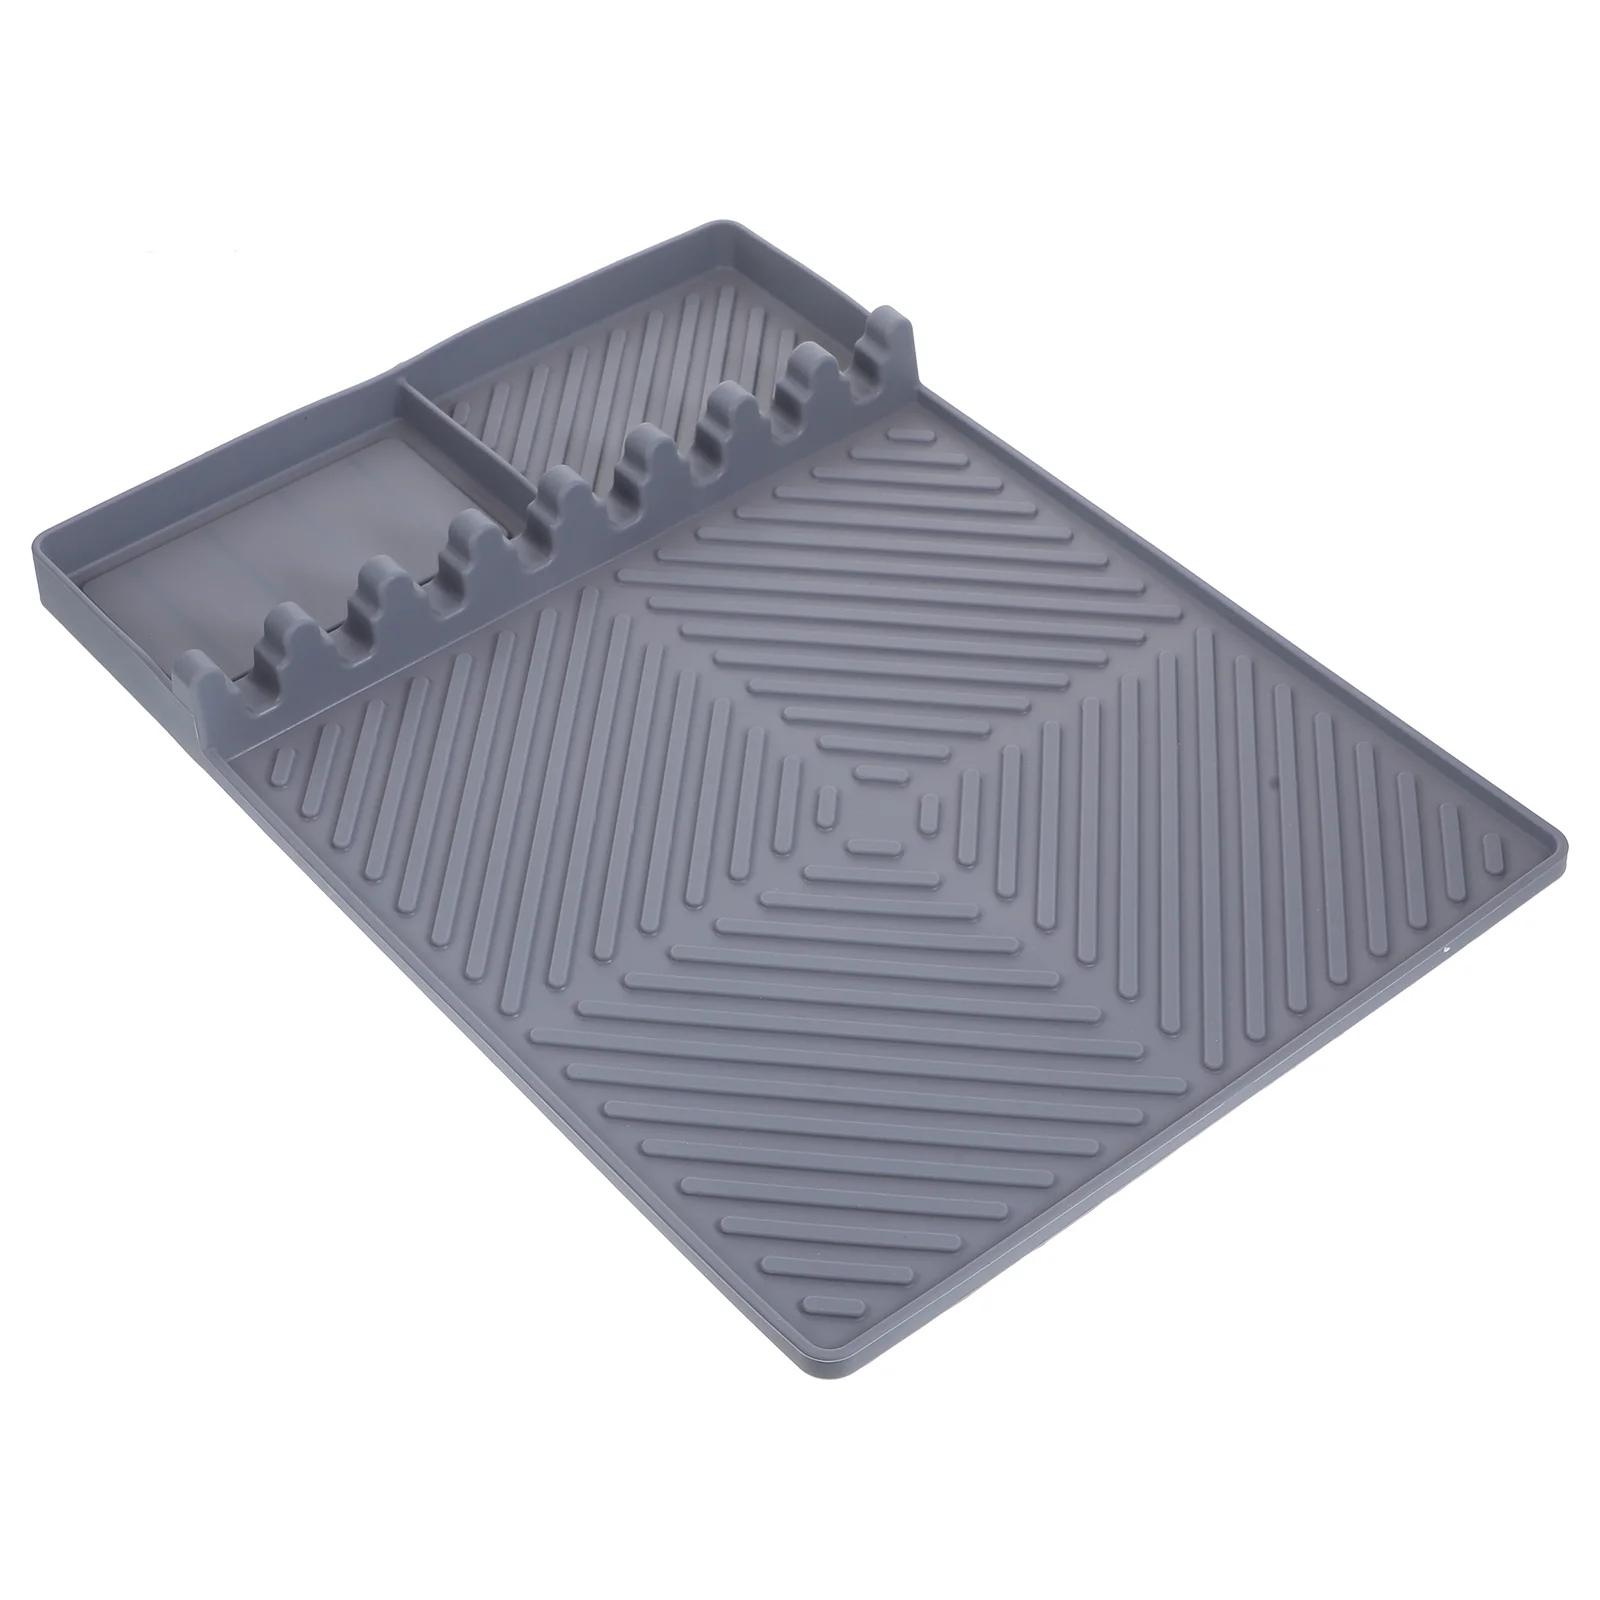 

Oven Protector Safely Griddle Tool Mat Grill Side Rest Black Stone Counter Top Mats Silicone Kitchen Silica Gel Shelf